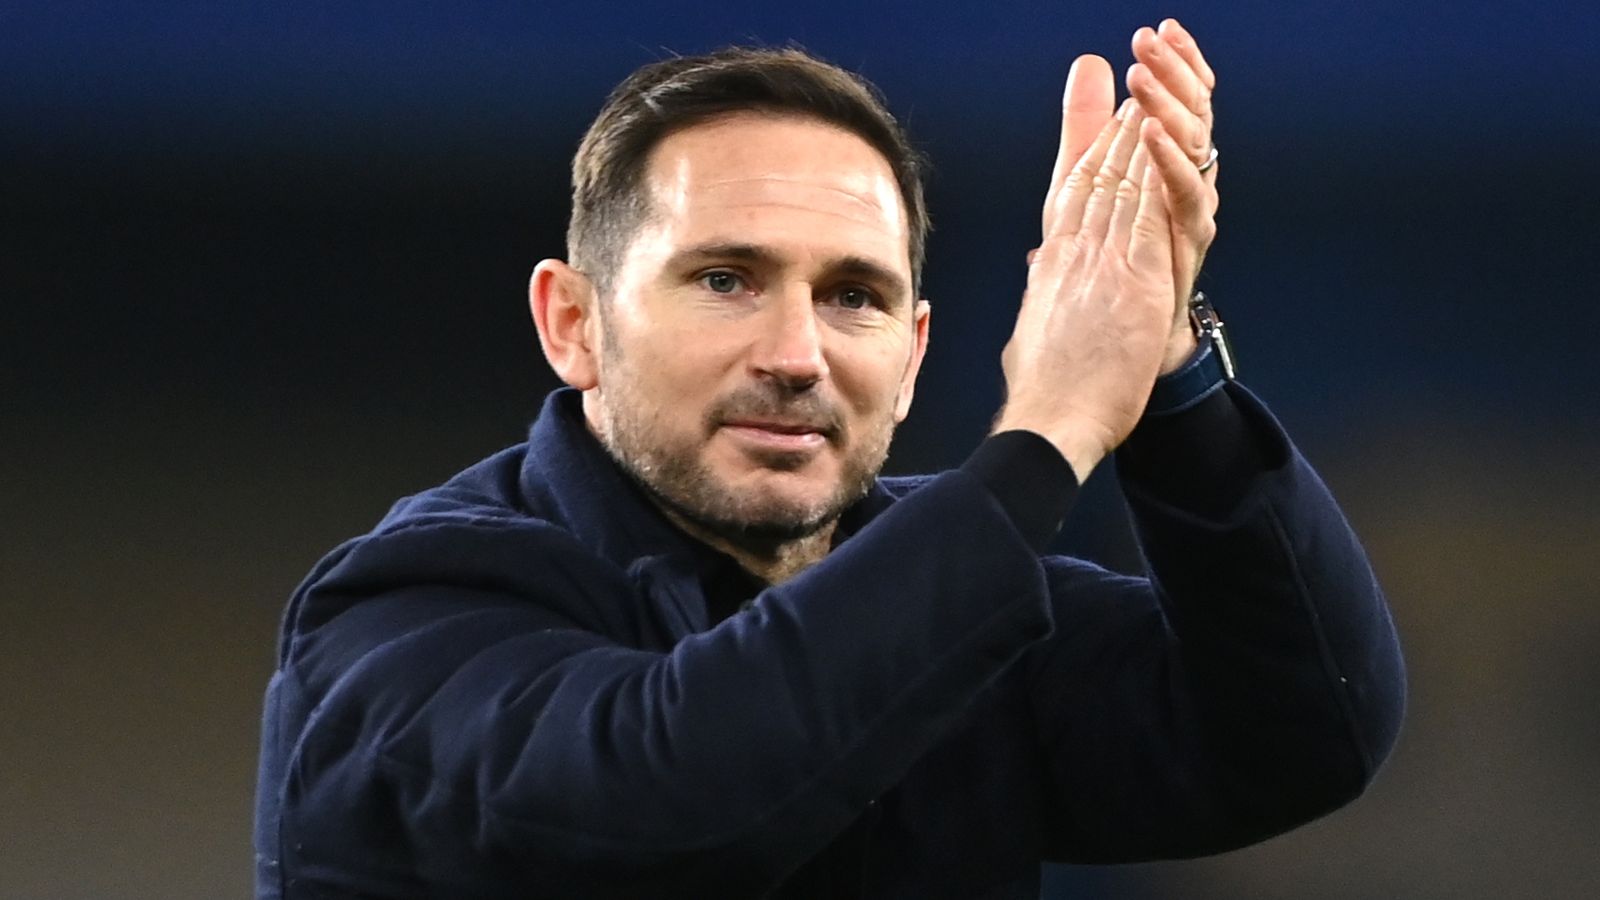 Frank Lampard: Former Chelsea boss leading candidate for new Everton manager's job after interviews